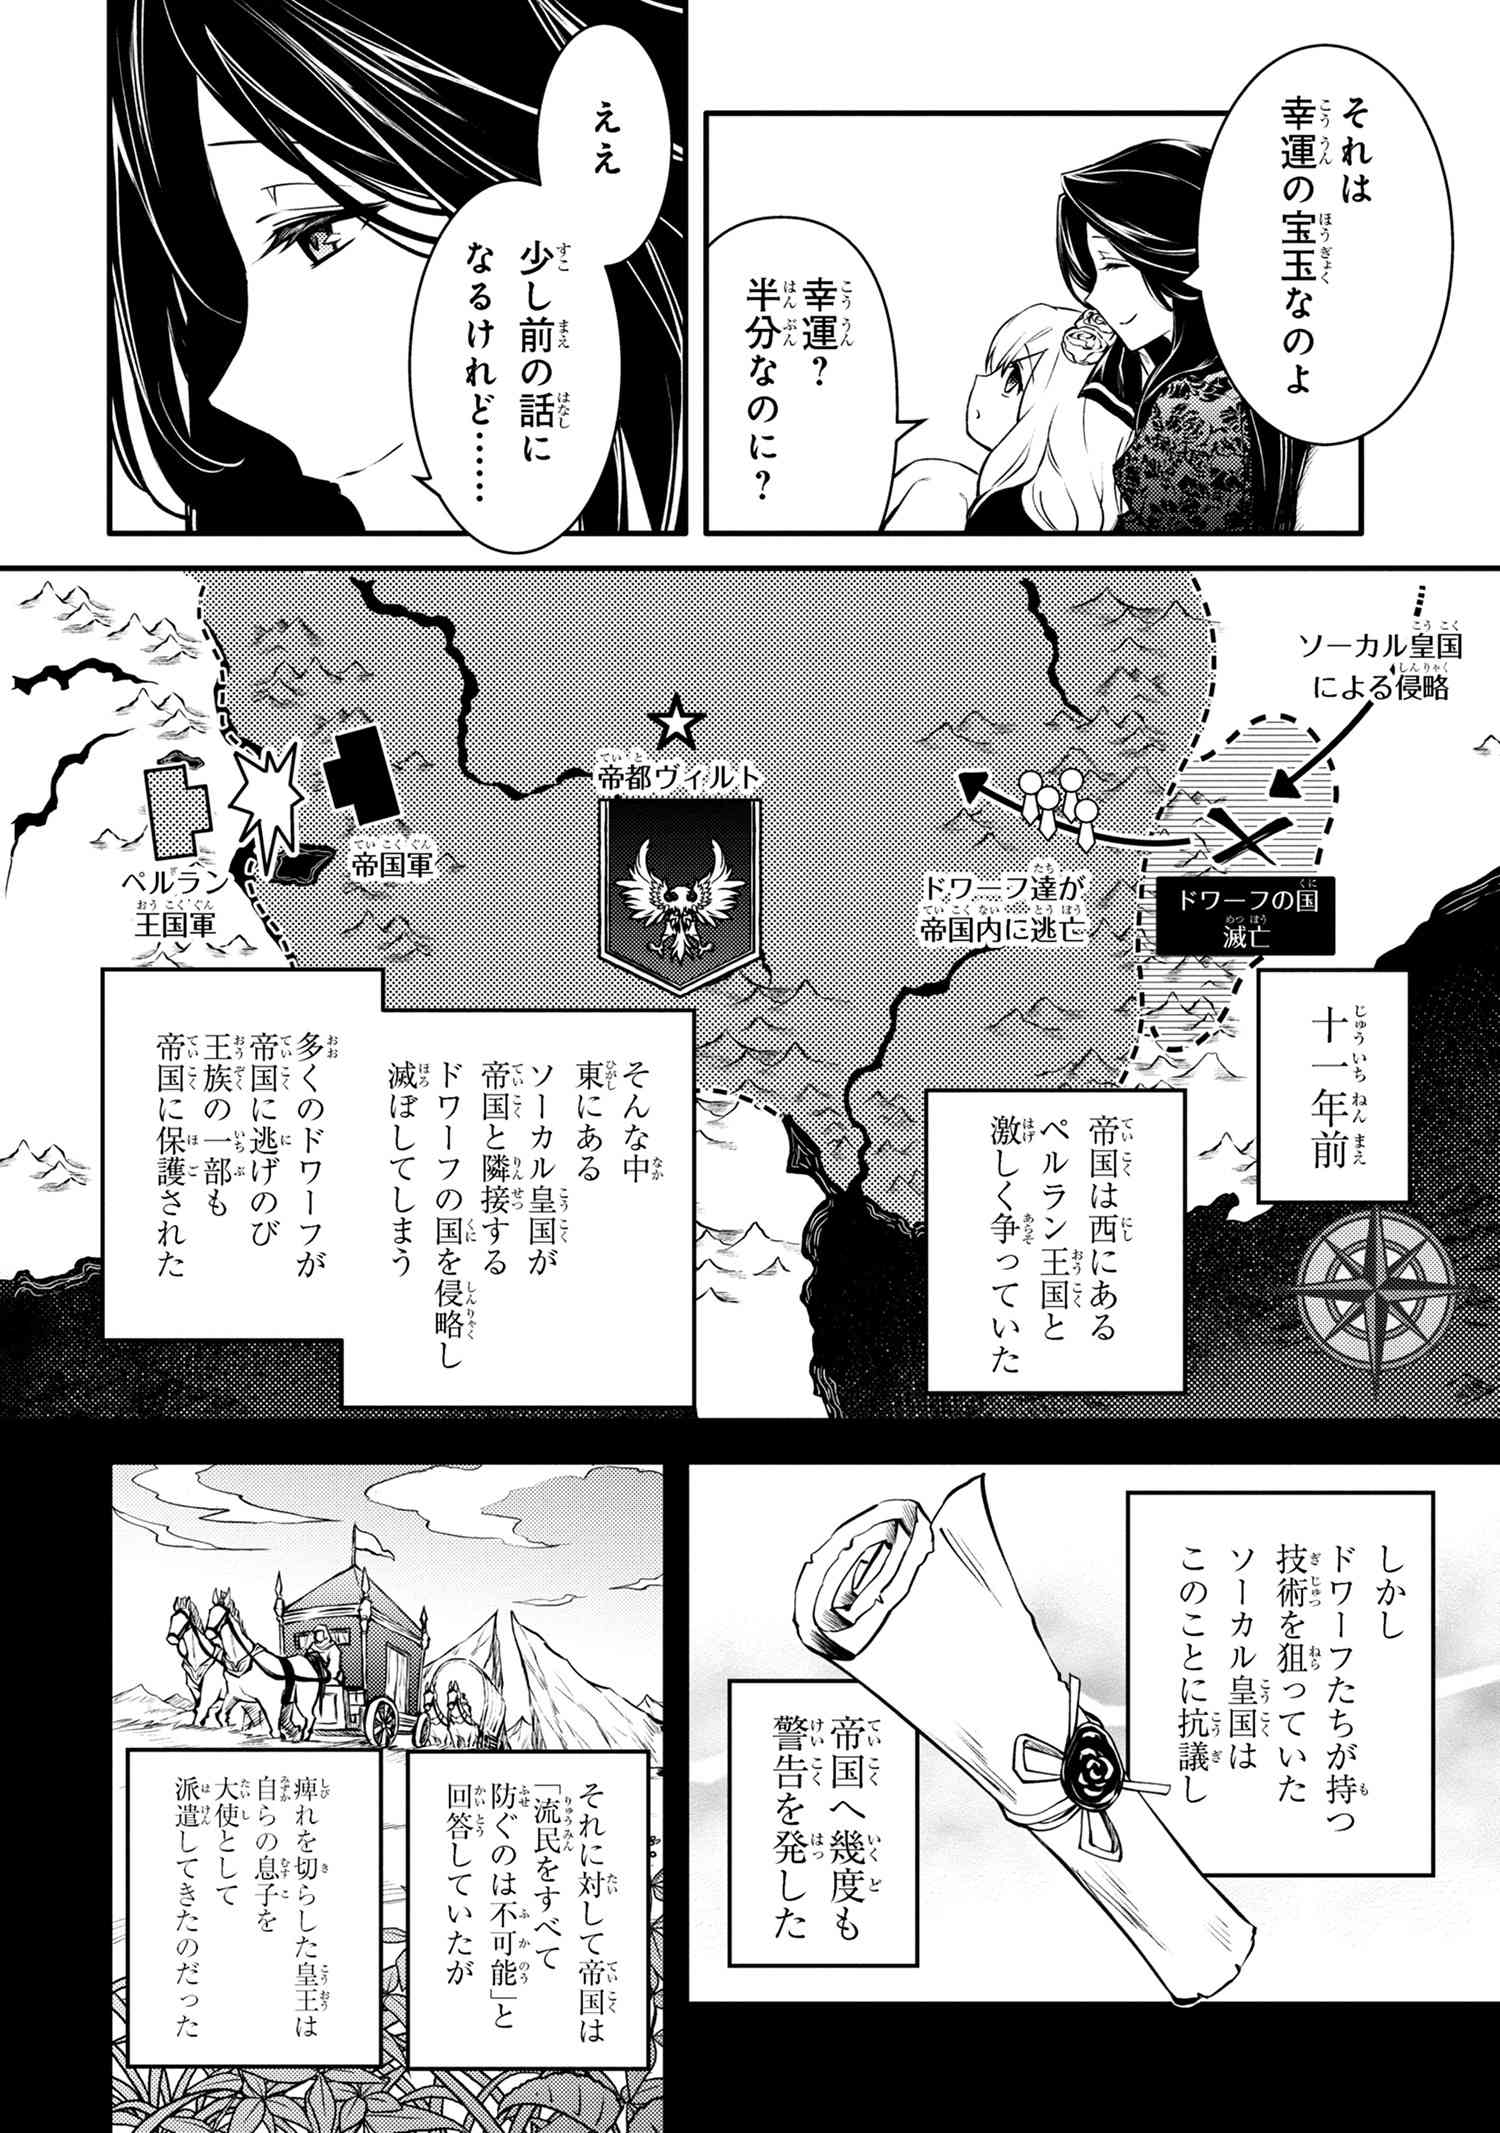 The Strongest Dull Prince’s Secret Battle for the Throne - Chapter 39.1 - Page 2